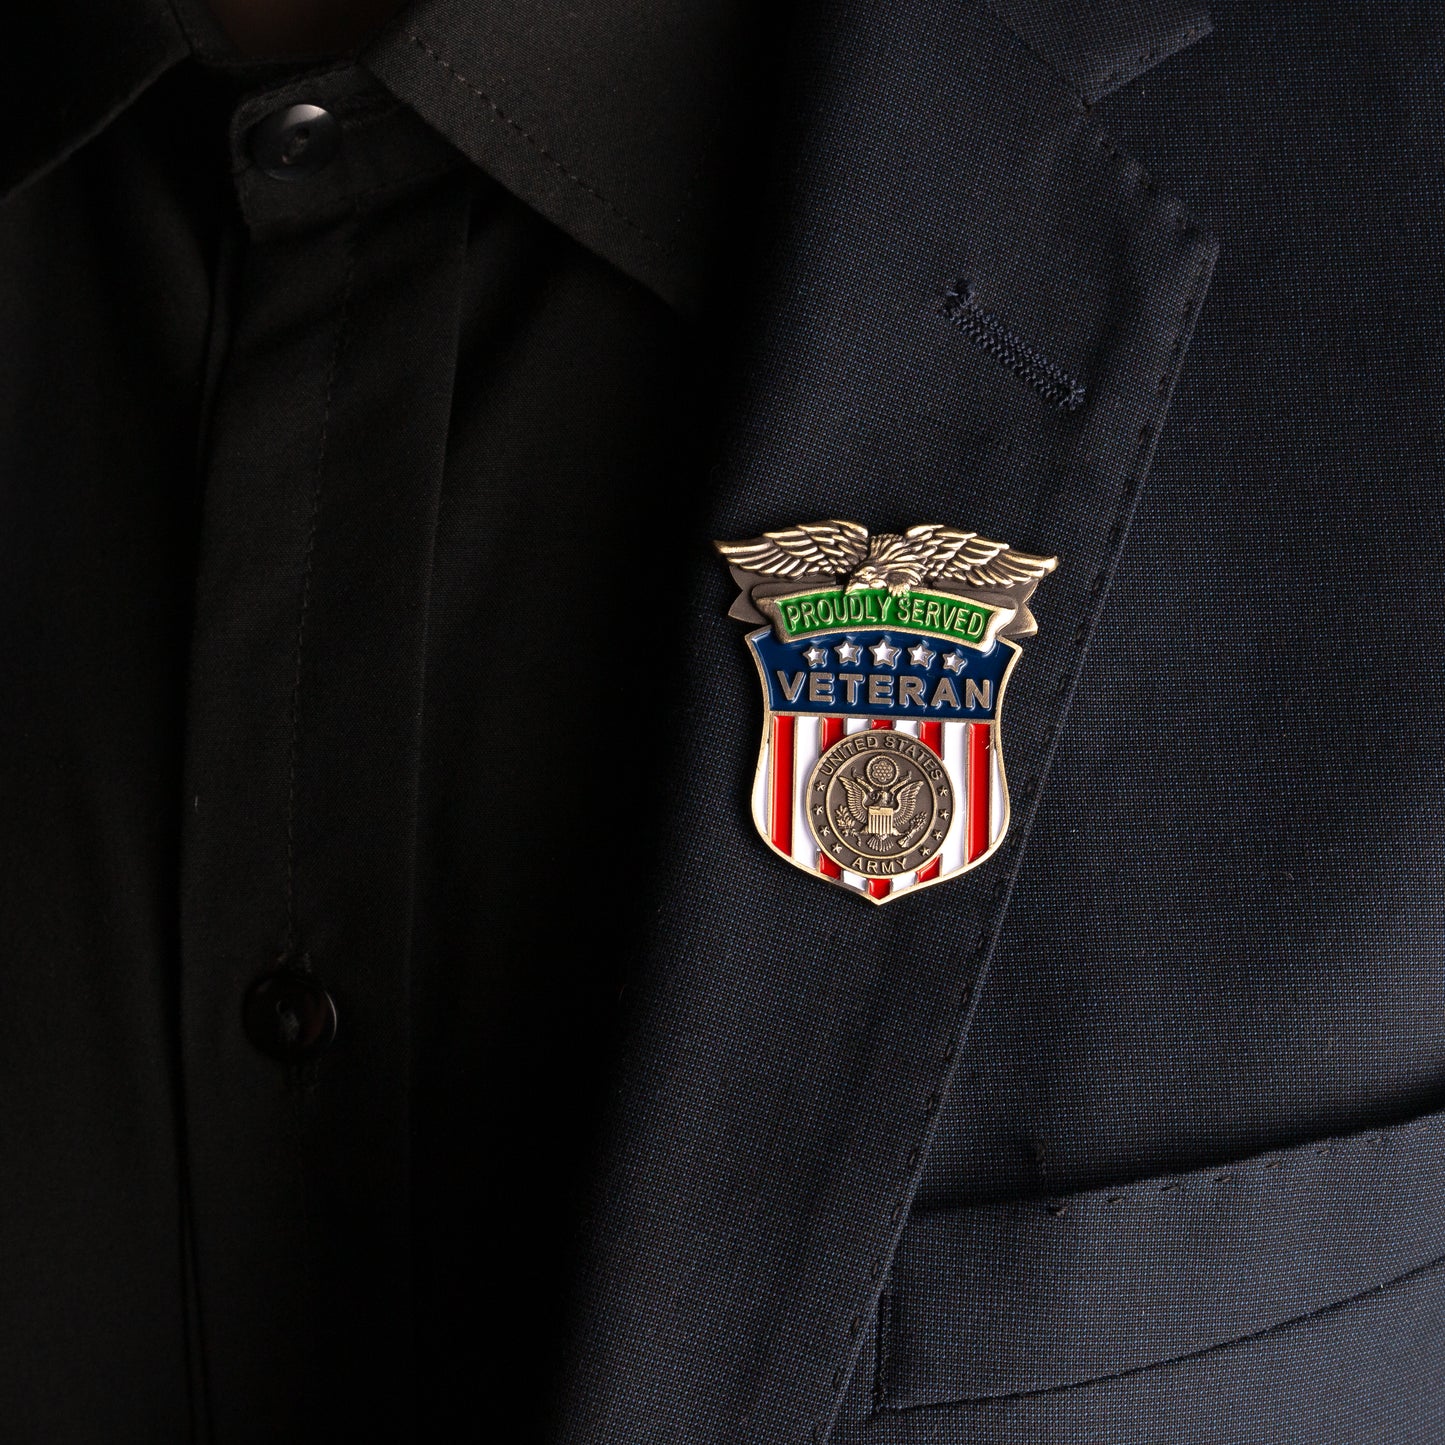 US Army Proudly Served Veteran Pin